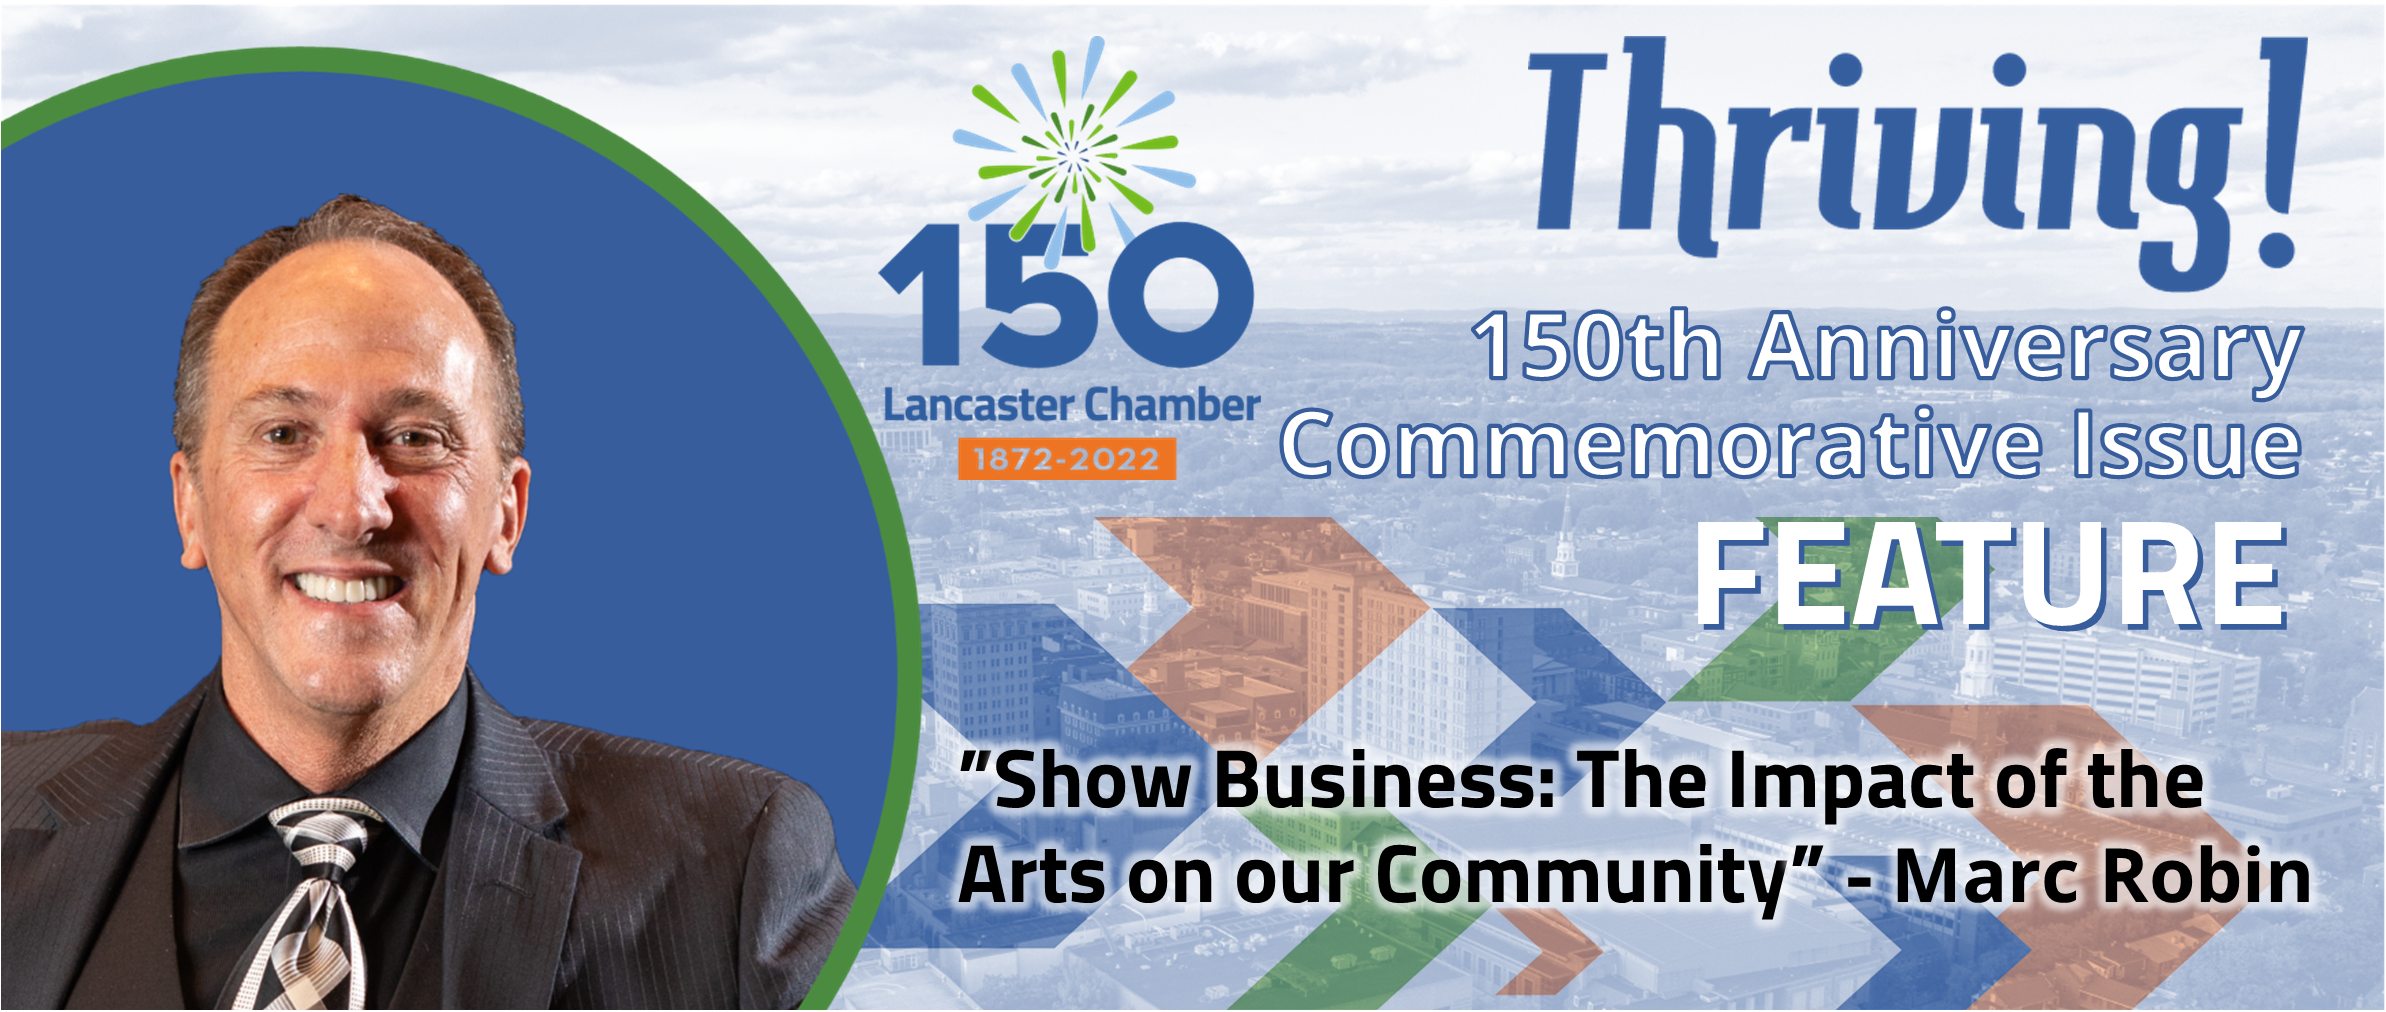 Show Business: The Impact of the Arts on our Community